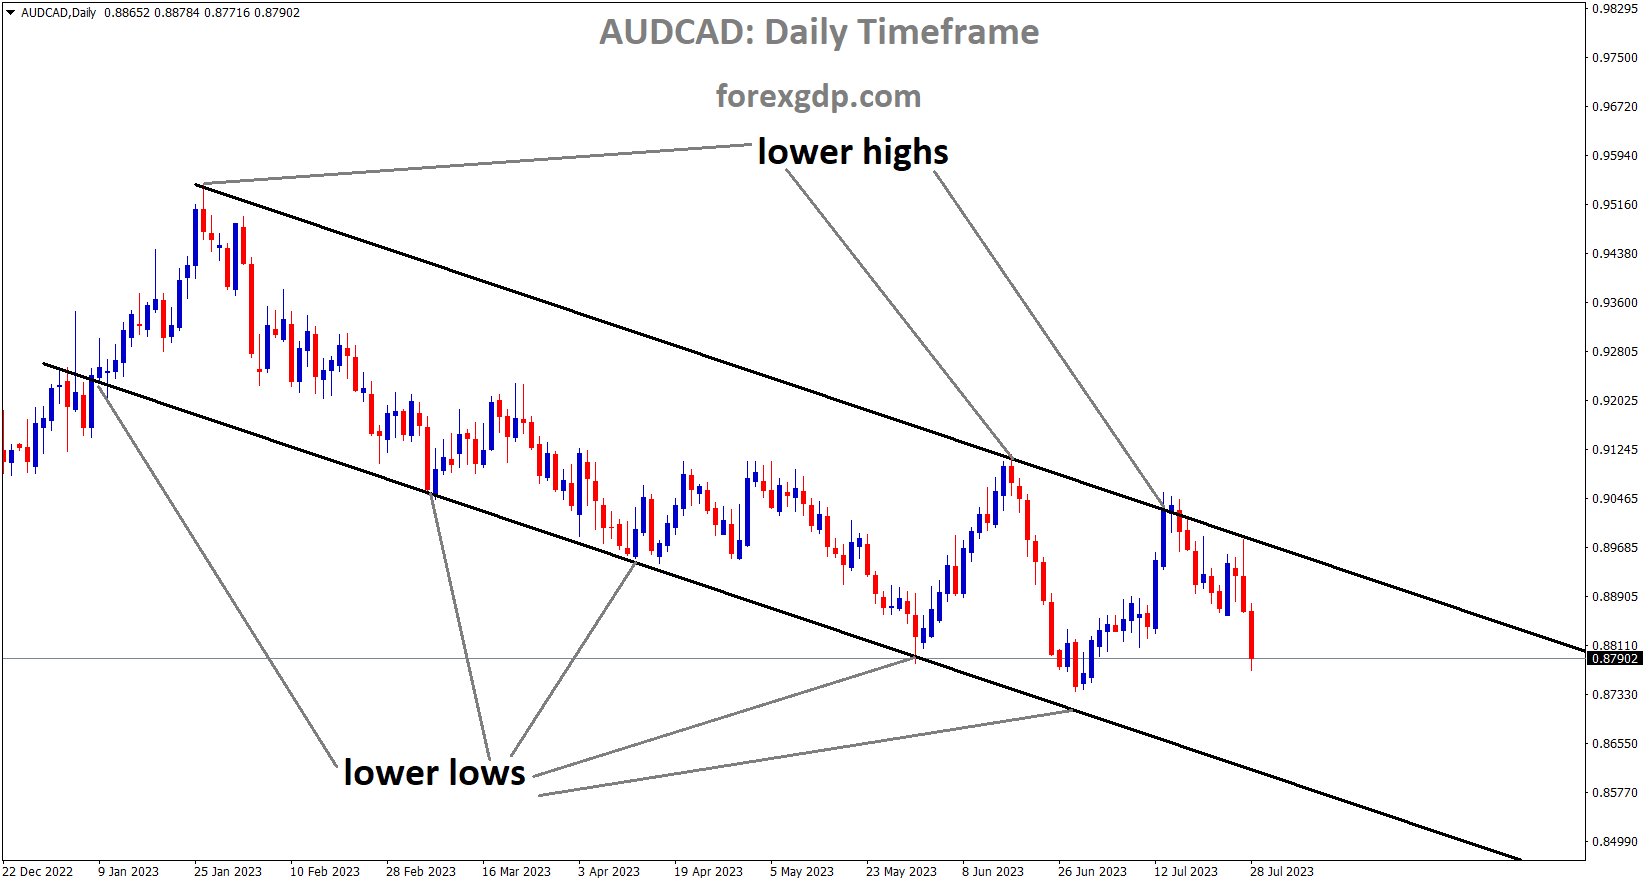 AUDCAD is moving in the Descending channel and the market has fallen from the lower high area of the channel 1